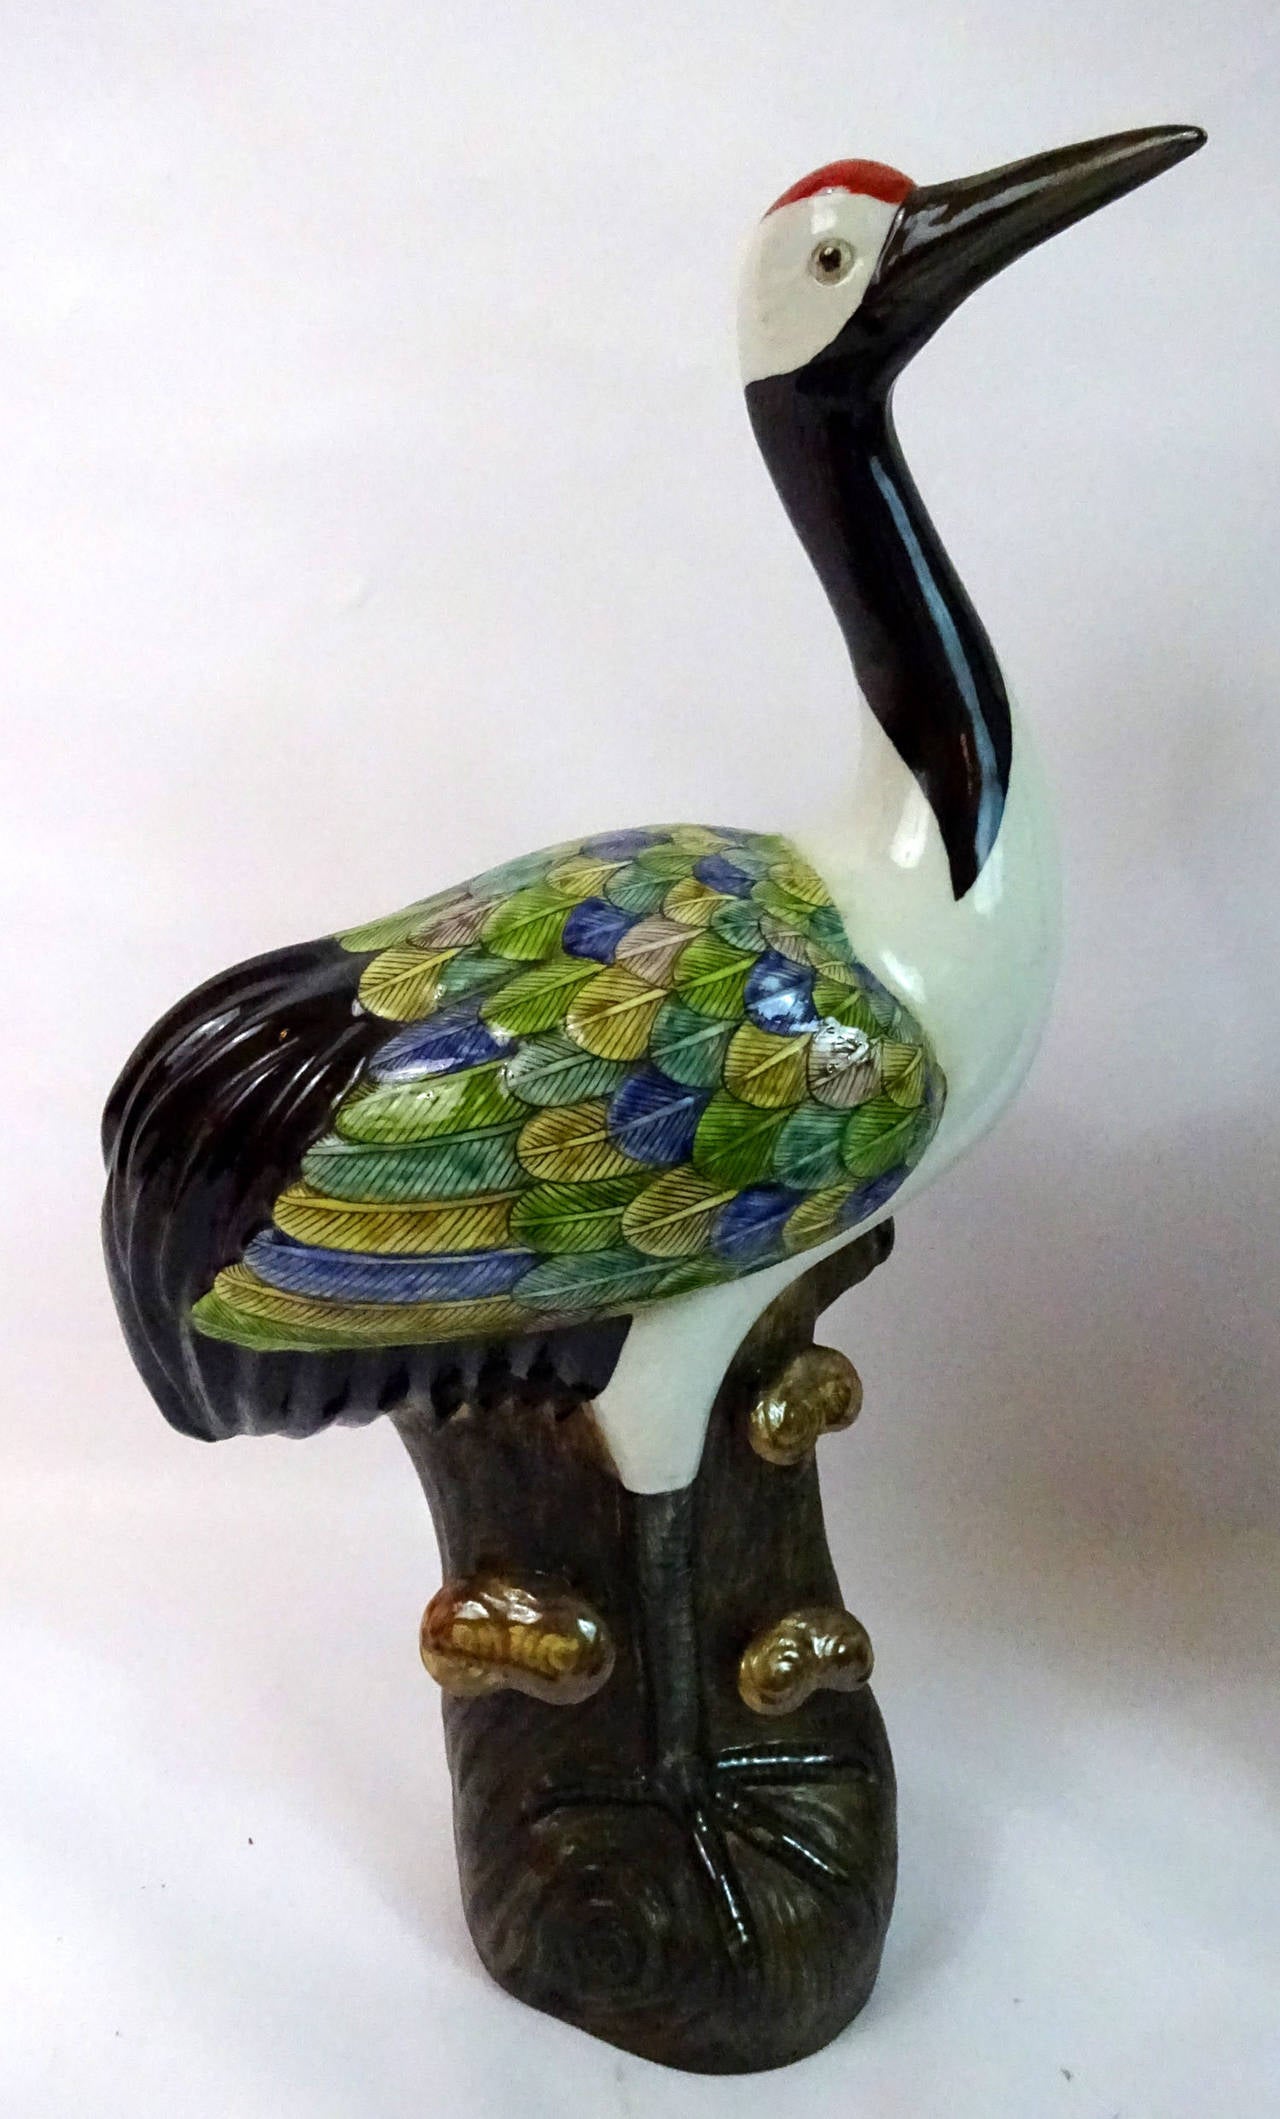 Left and right pair of Early 20th Century Chinese polychrome porcelain storks on wooden perches, with four character marks on the bottom.